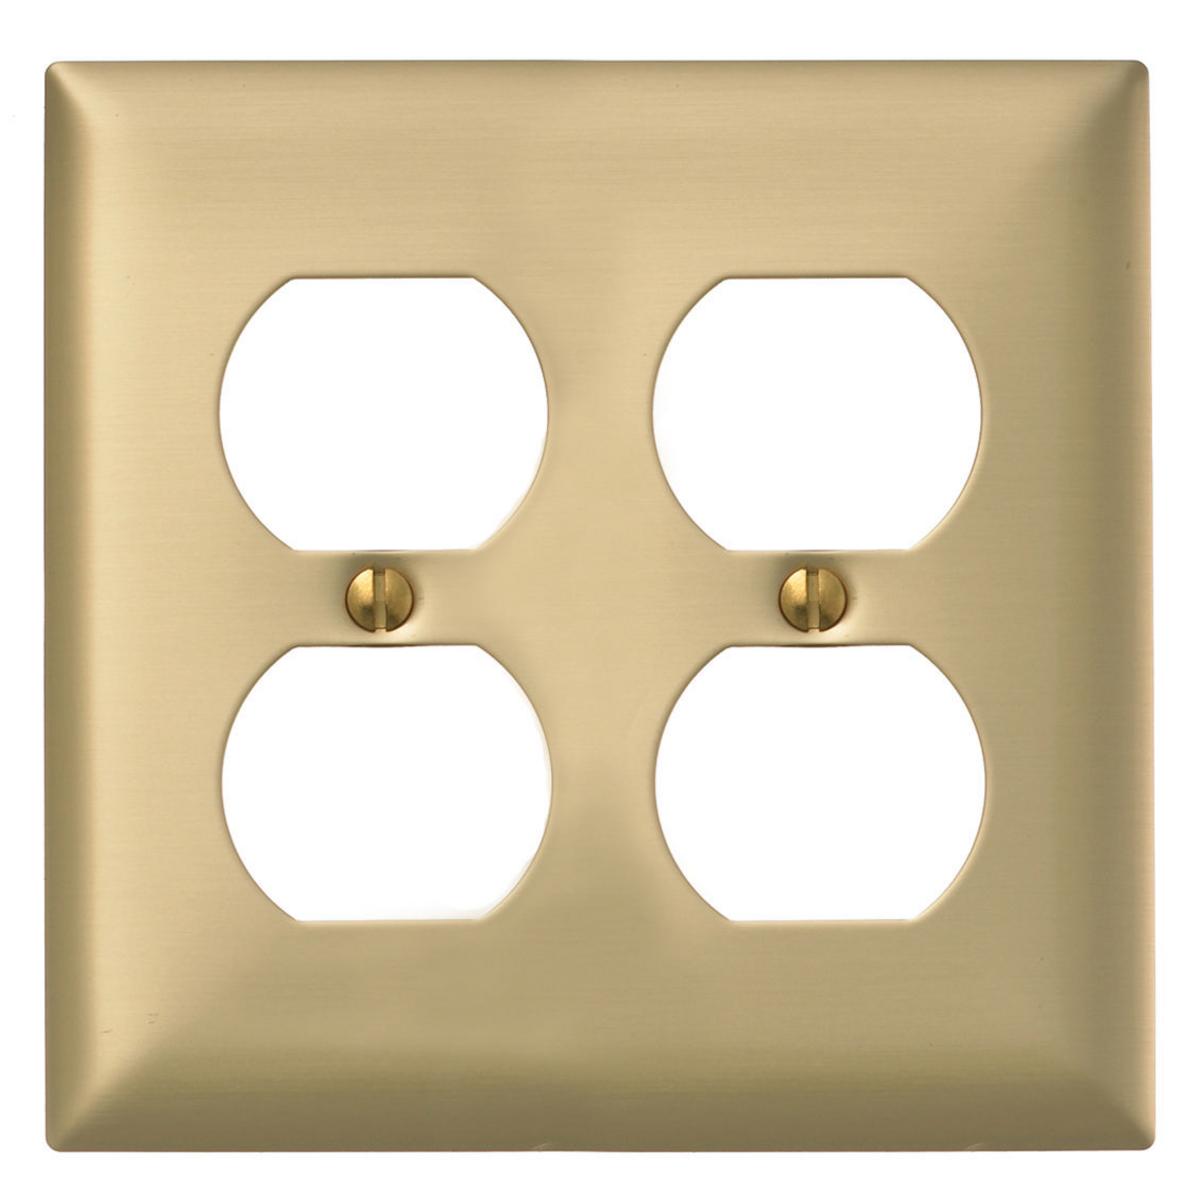 Hubbell SBP82 Wallplates and Boxes, Metallic Plates, 2- Gang, 2) Duplex Openings, Standard Size, Brass  ; Non-magnetic and corrosion resistant ; Finish is lacquer coated to inhibit oxidation ; Protective plastic film helps to prevent scratches and damage ; Protective f